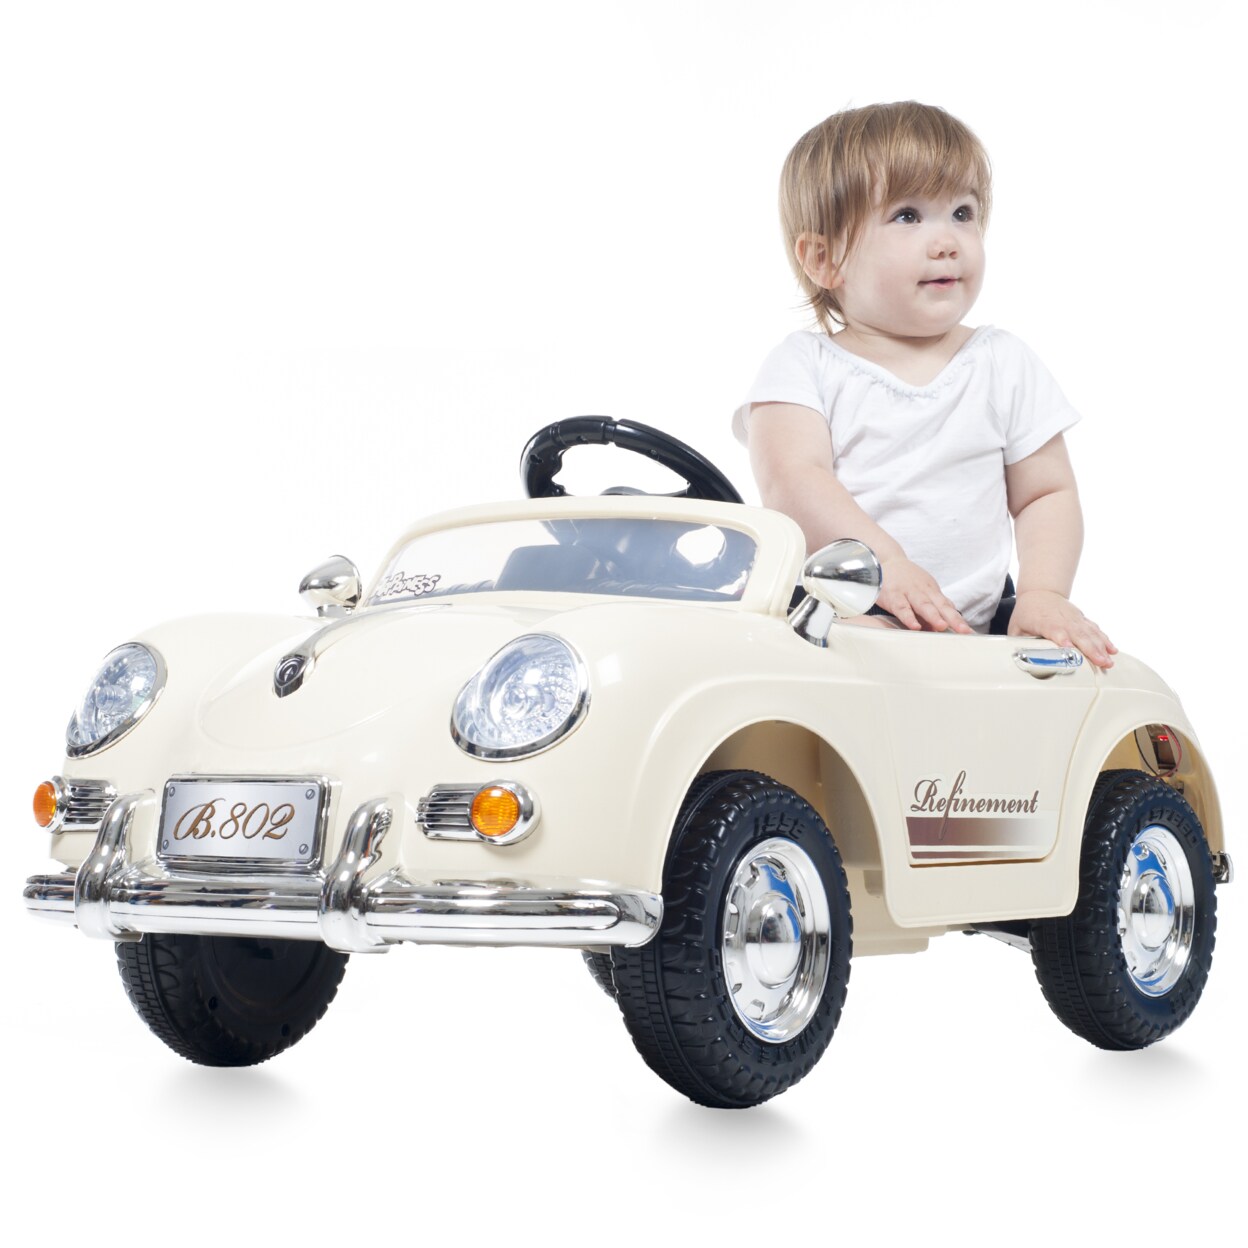 Lil&#x27; Rider Lil Rider 58 Speedy Sportster Battery Operated Classic Car w/ Remote Ages 2 - 4